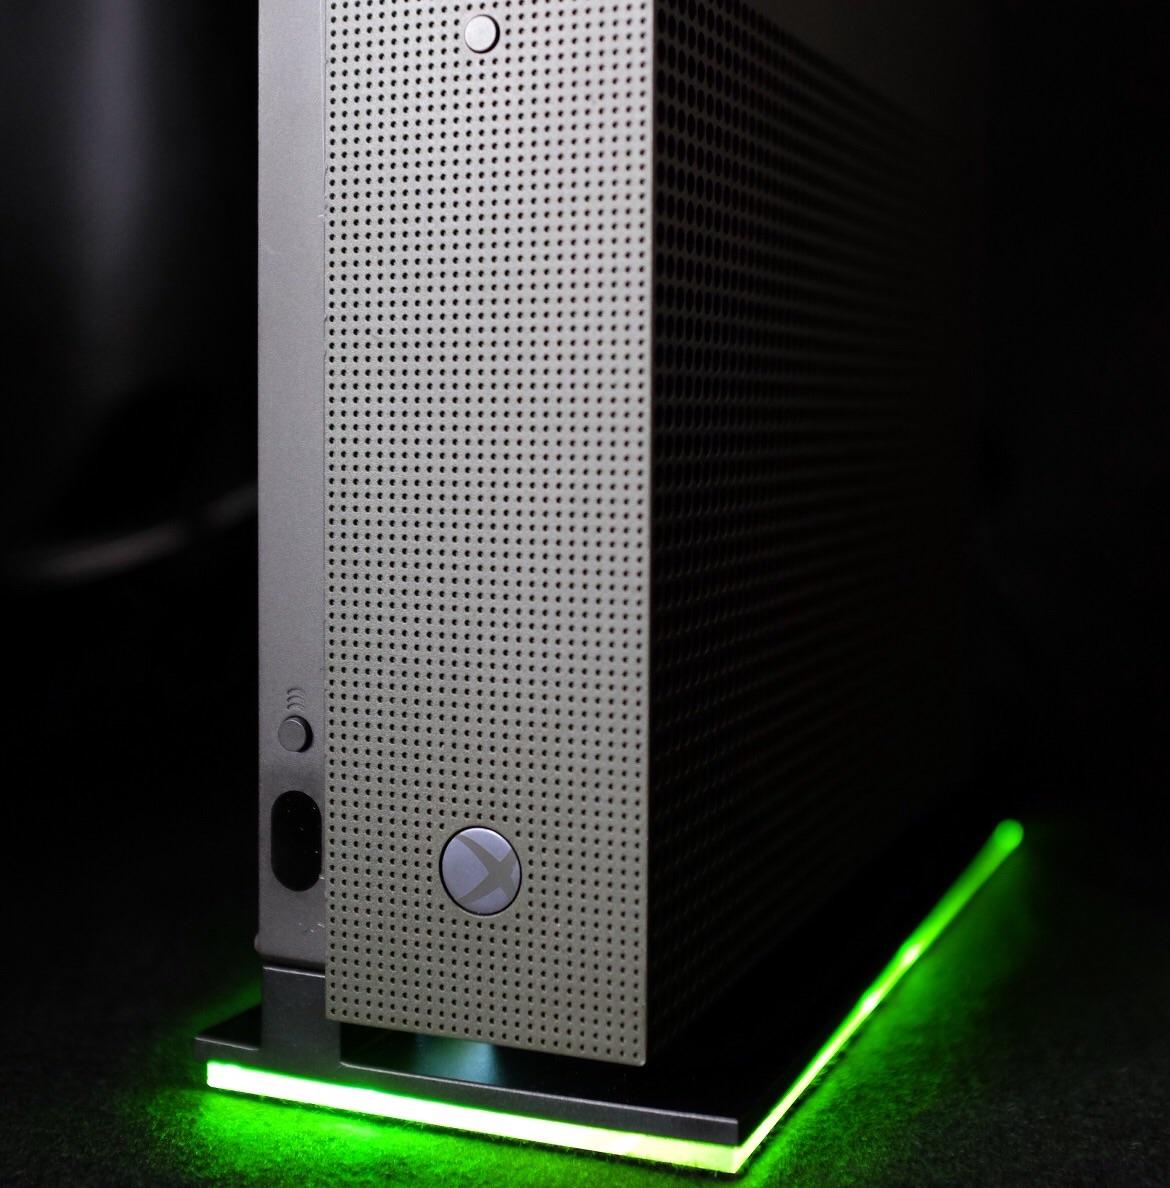 This Guy Made a Light Stand For the Xbox One S, And It Looks Awesome